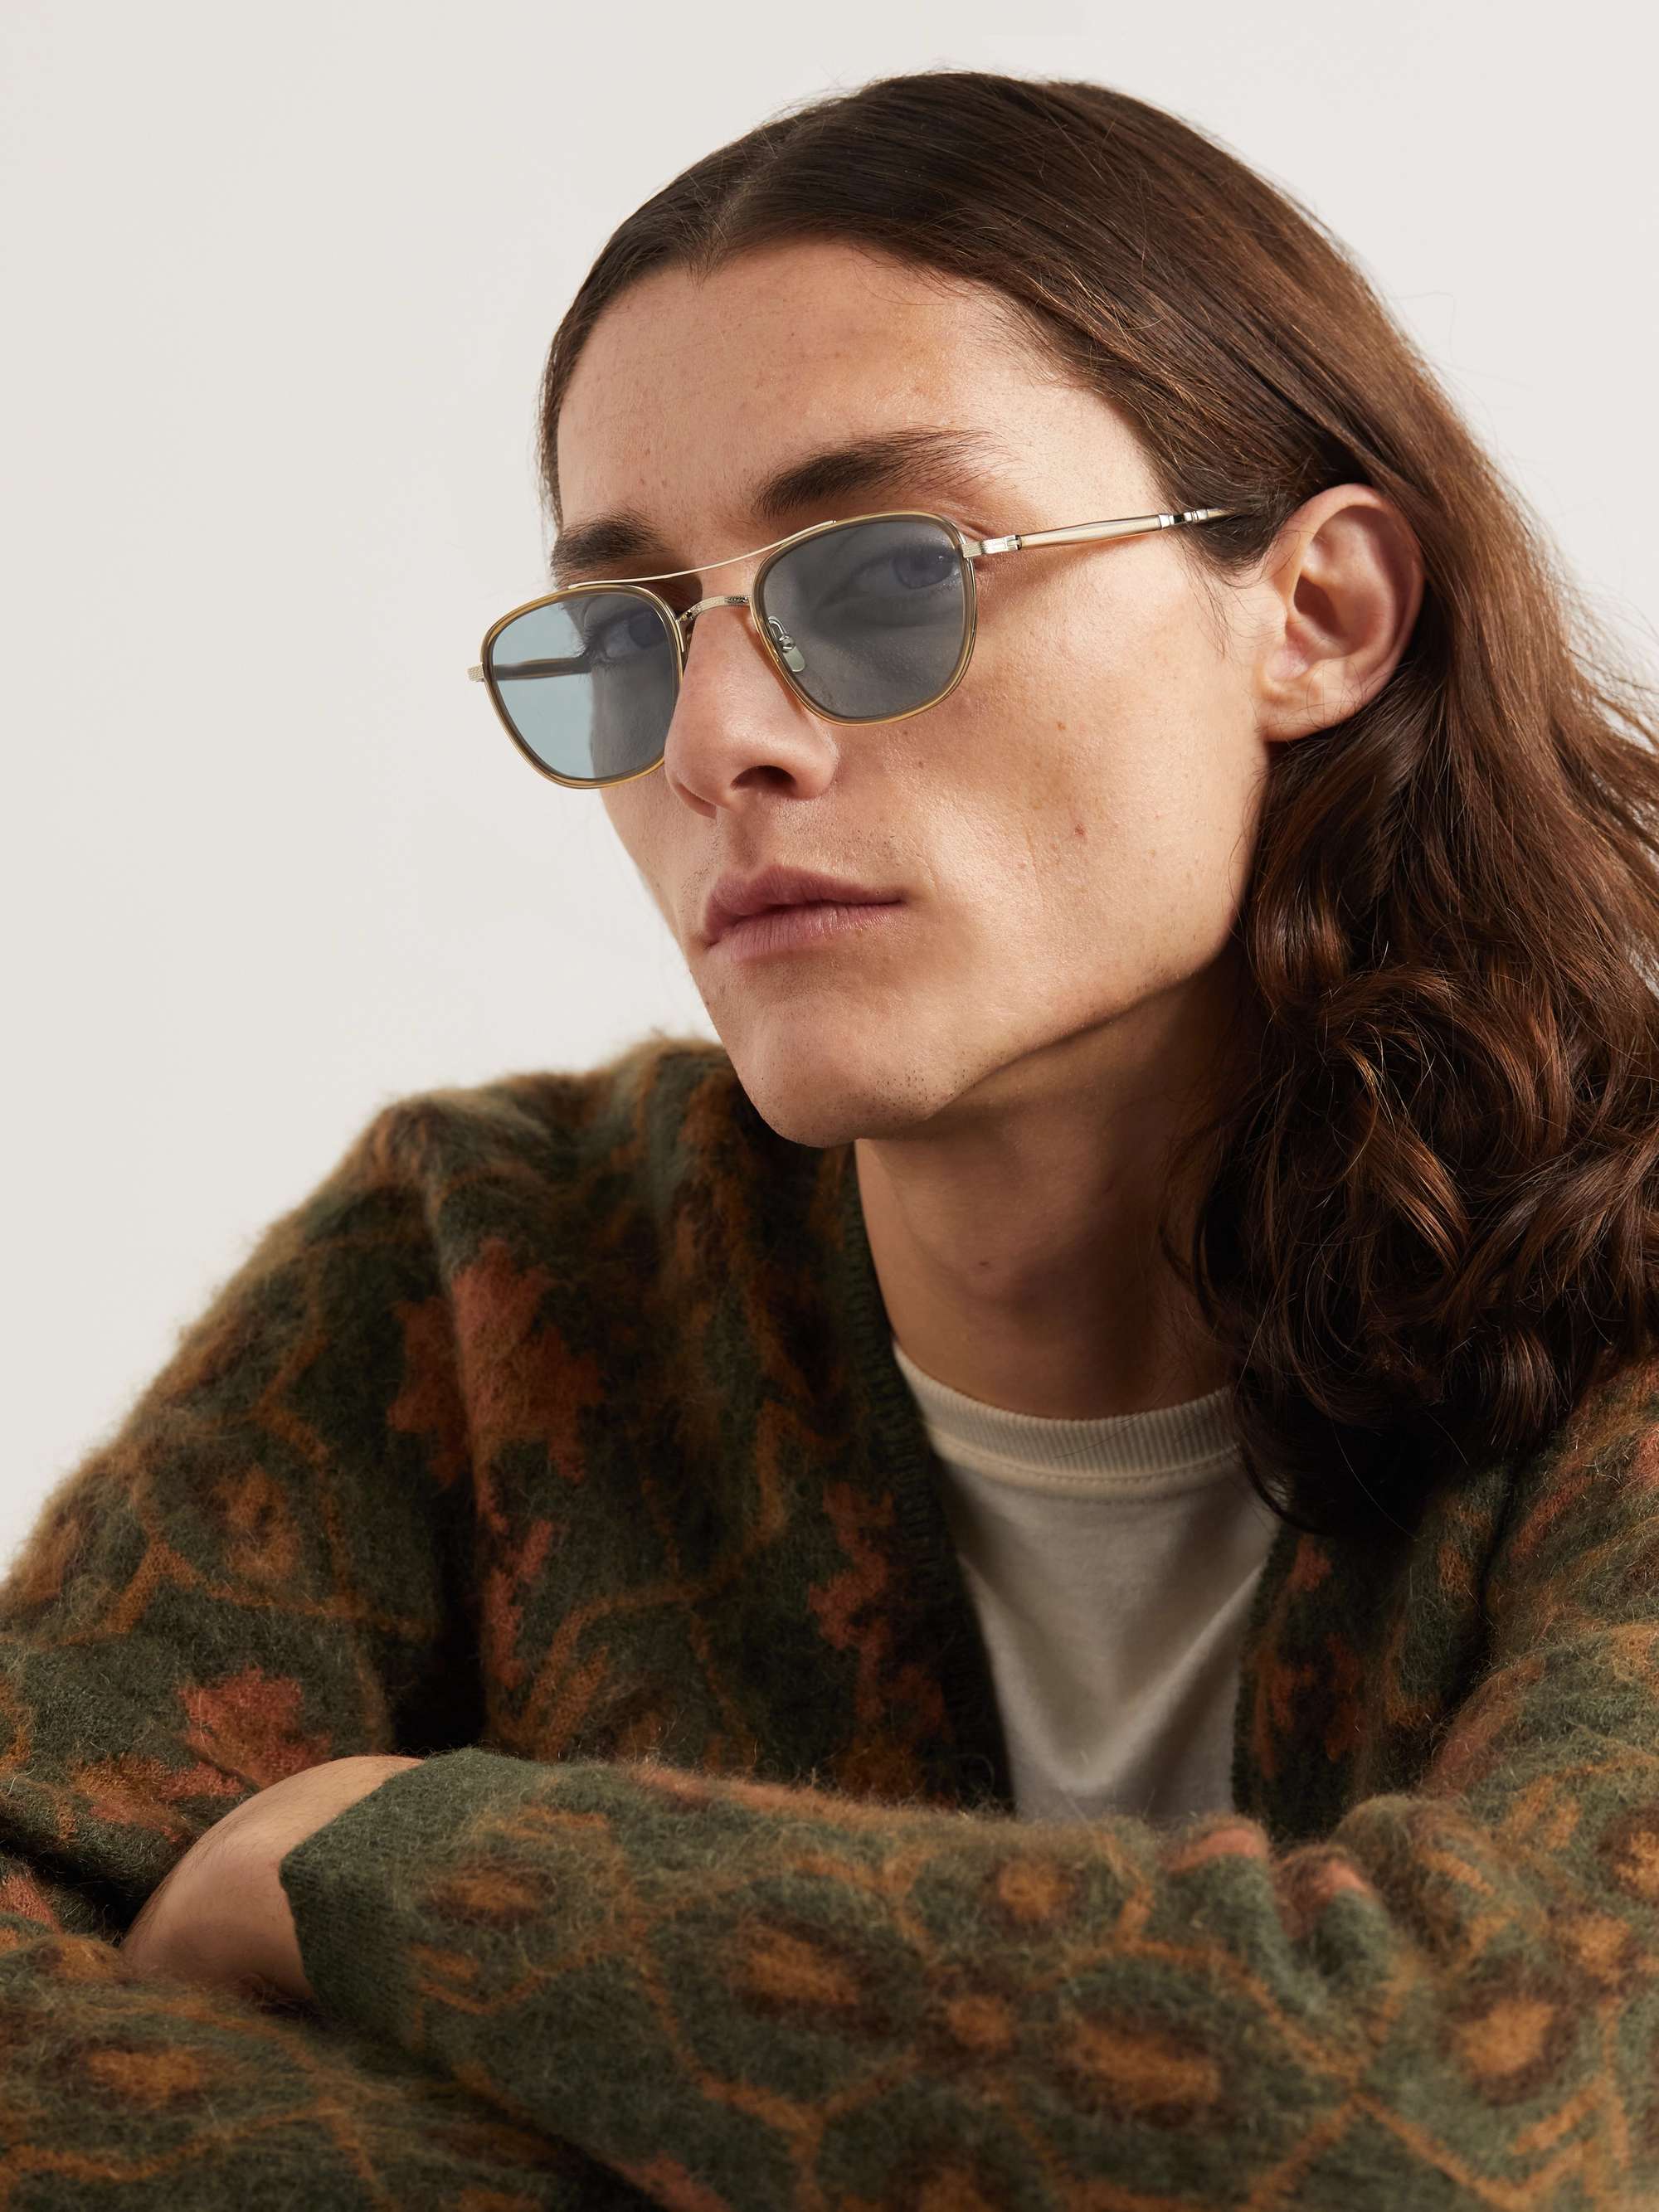 MR LEIGHT Price D-Frame Gold-Tone and Acetate Sunglasses